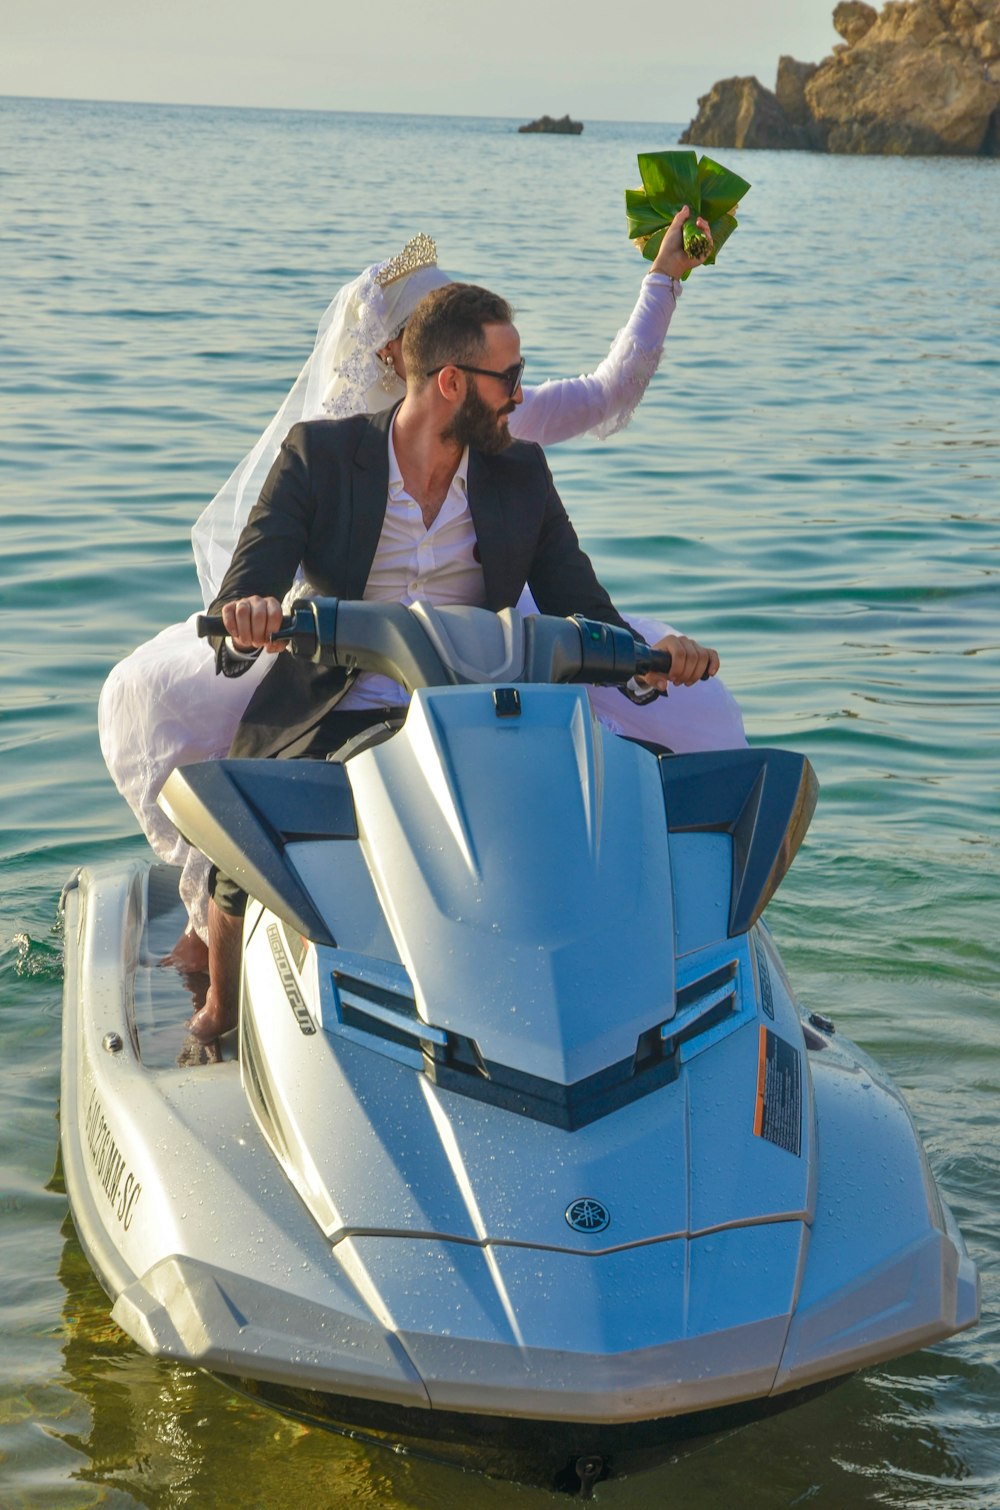 man in gray jacket riding white and blue personal watercraft